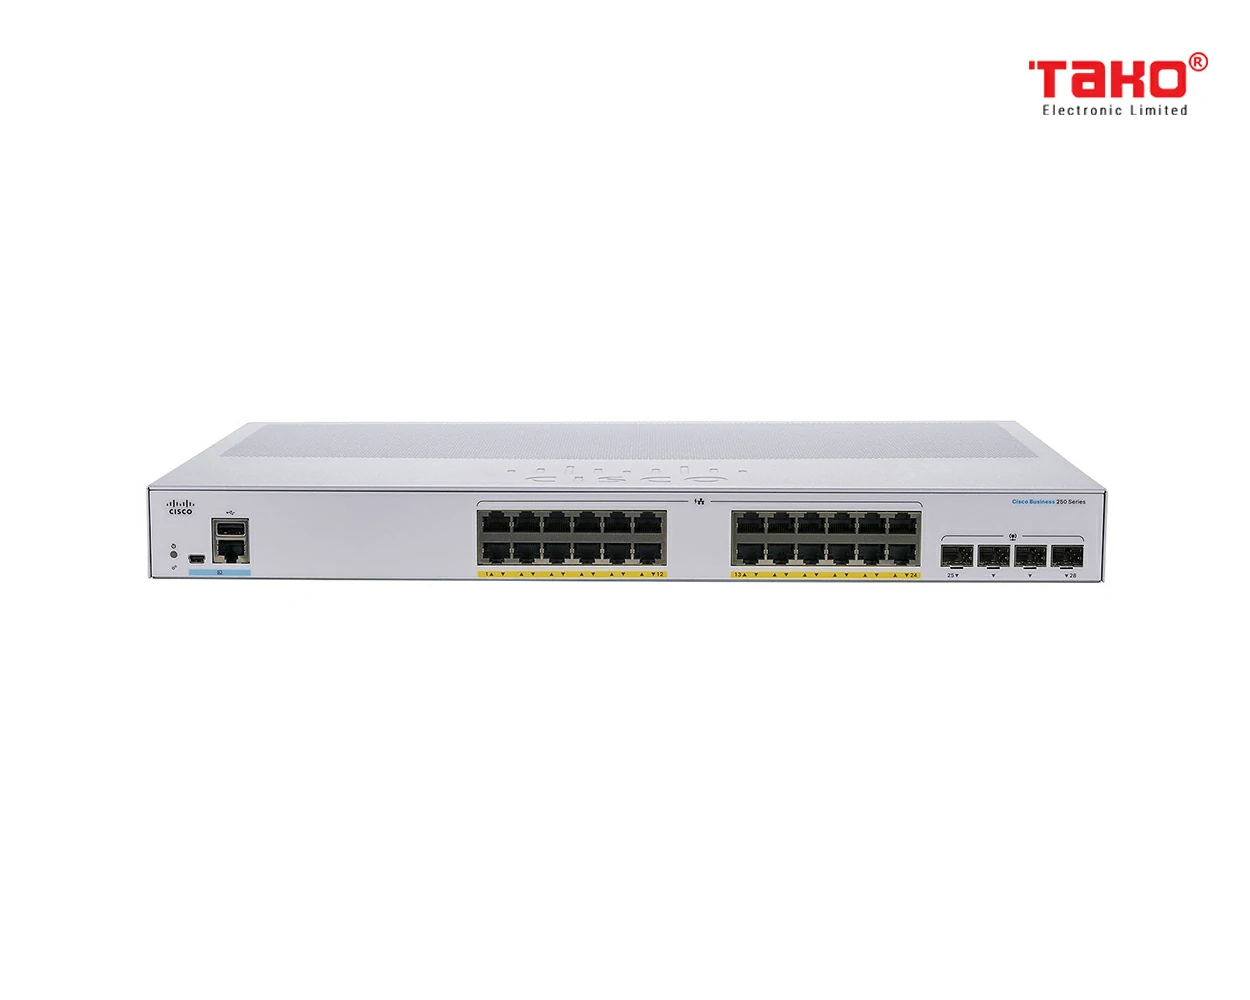 Cisco CBS350-24P-4X 24-port 10/100/1000 Mbps PoE Layer 3 manageable web switch 4 x 10 Gbps SFP slots 1